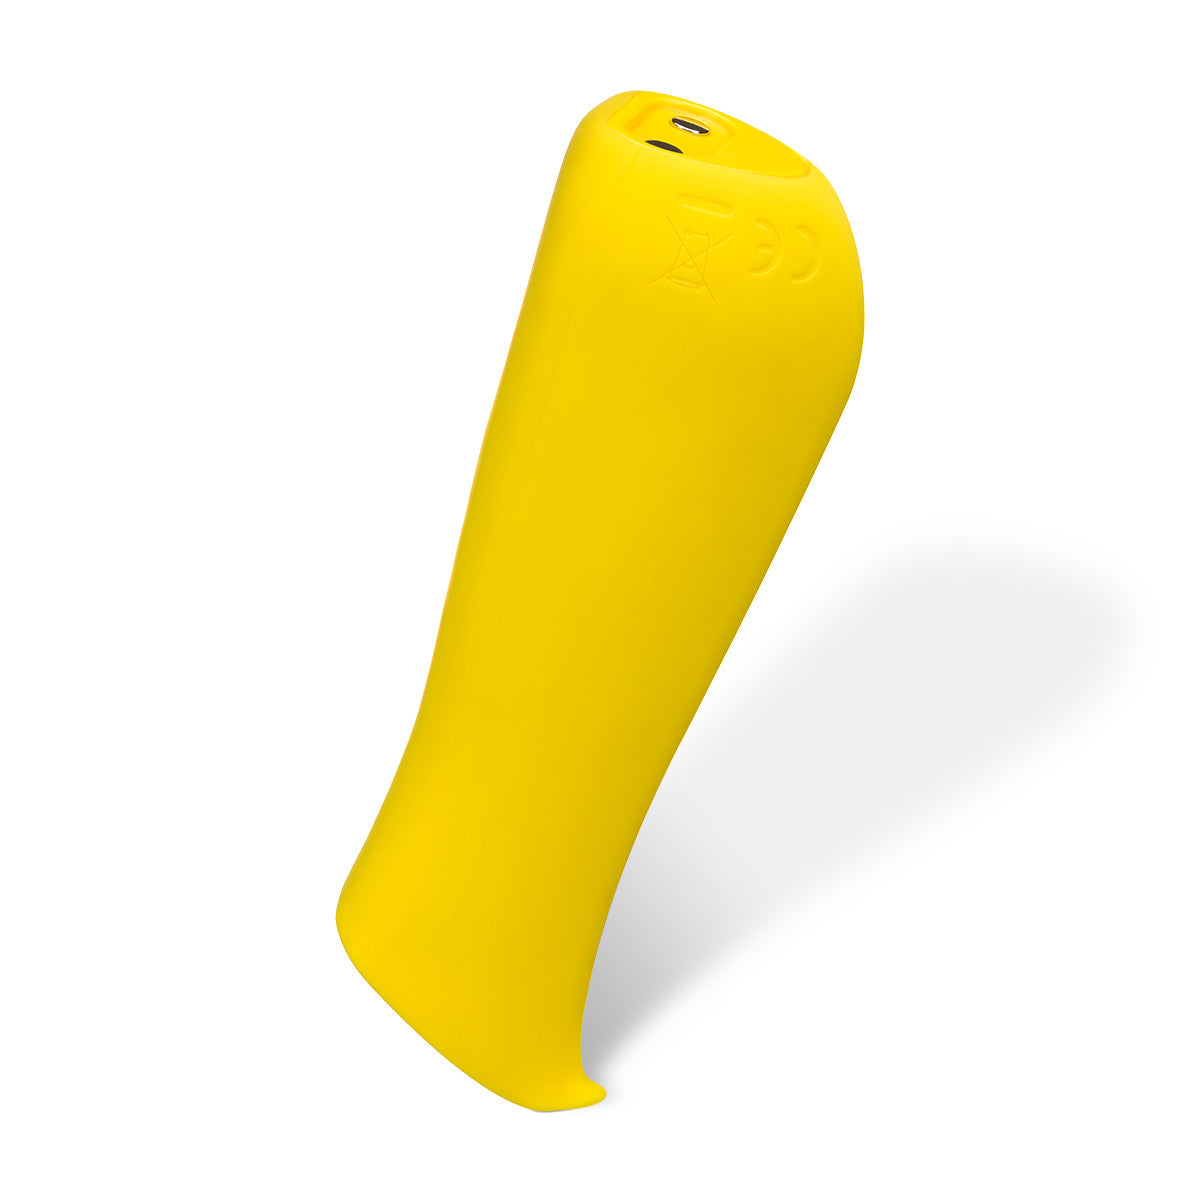 Kip Waterproof Rechargeable Lipstick Vibrator by Dame - Yellow with vibrating edge facing down